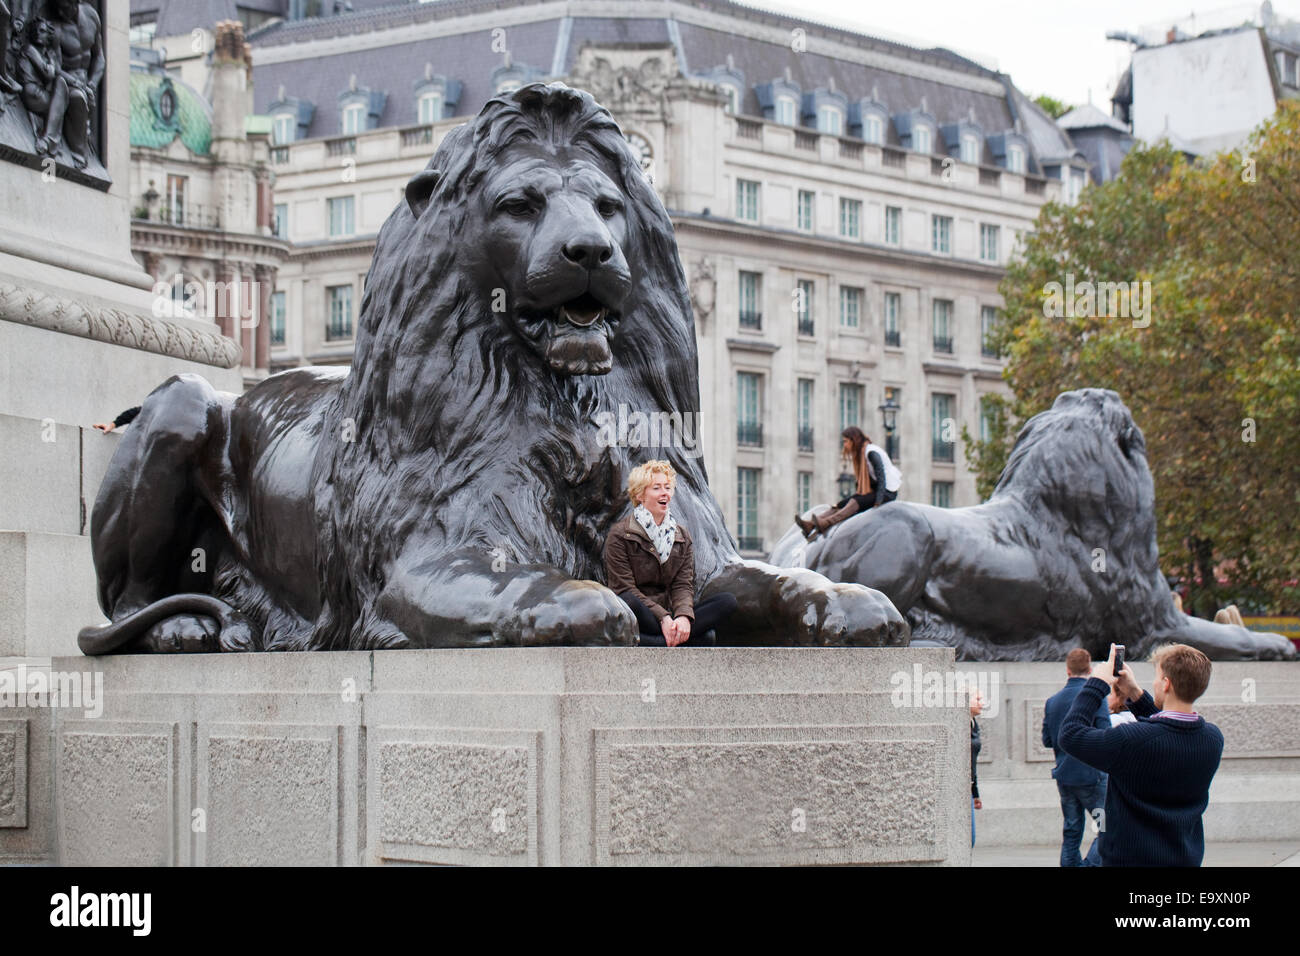 Trafalgar Square. London. England.  A 'Landseer Lion' on plinth in the foreground with young woman posing for man to photograph. Stock Photo